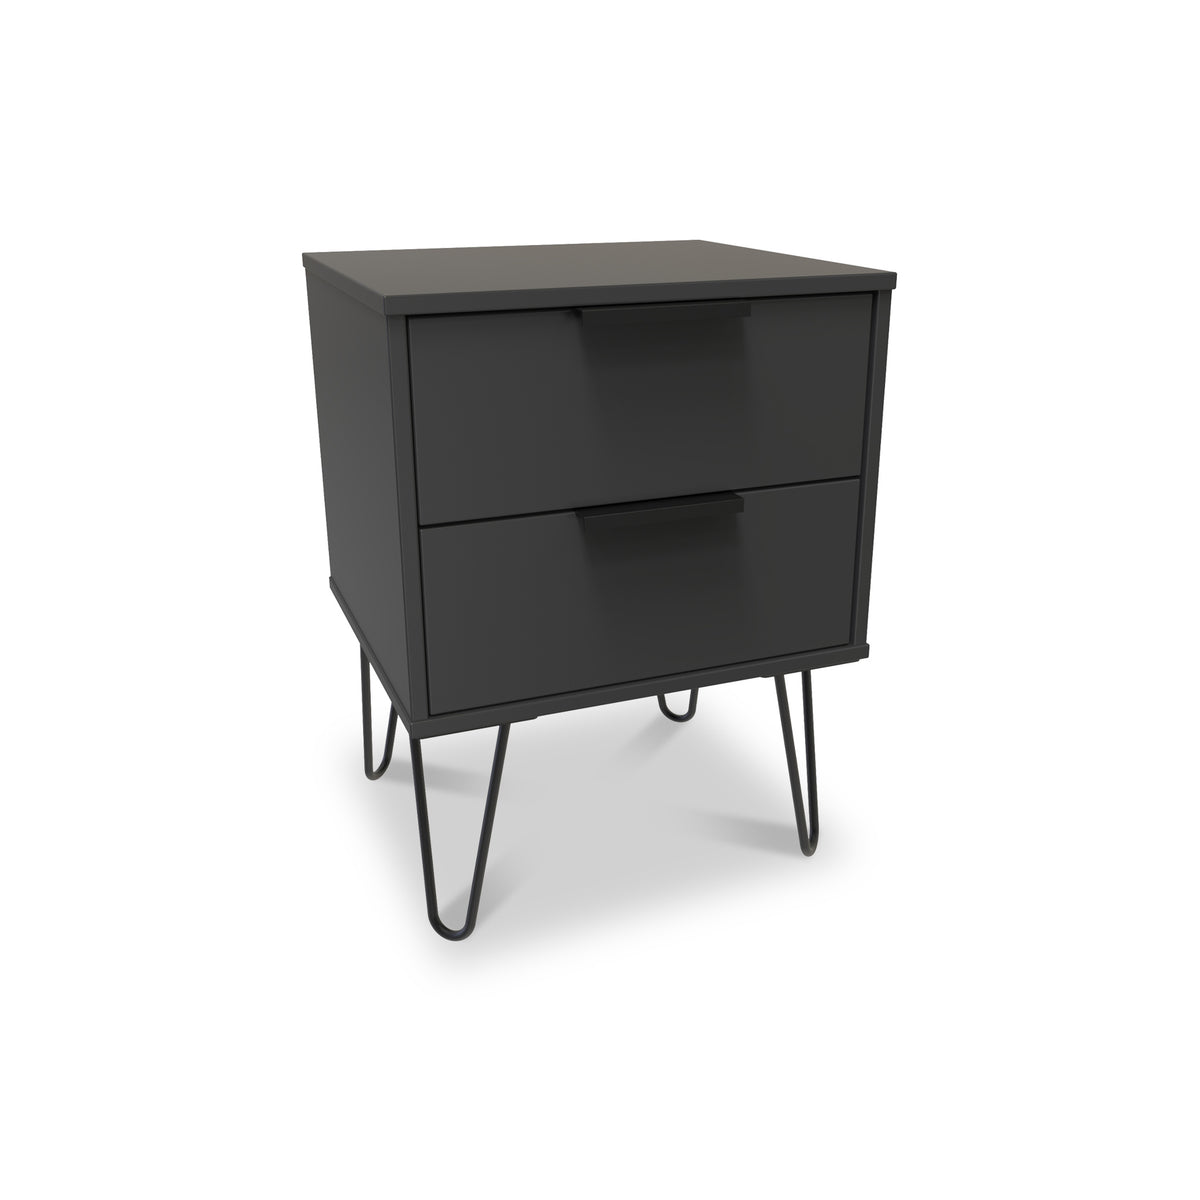 Moreno Graphite Grey Wireless Charging 2 Drawer Bedside Table by Roseland Furniture